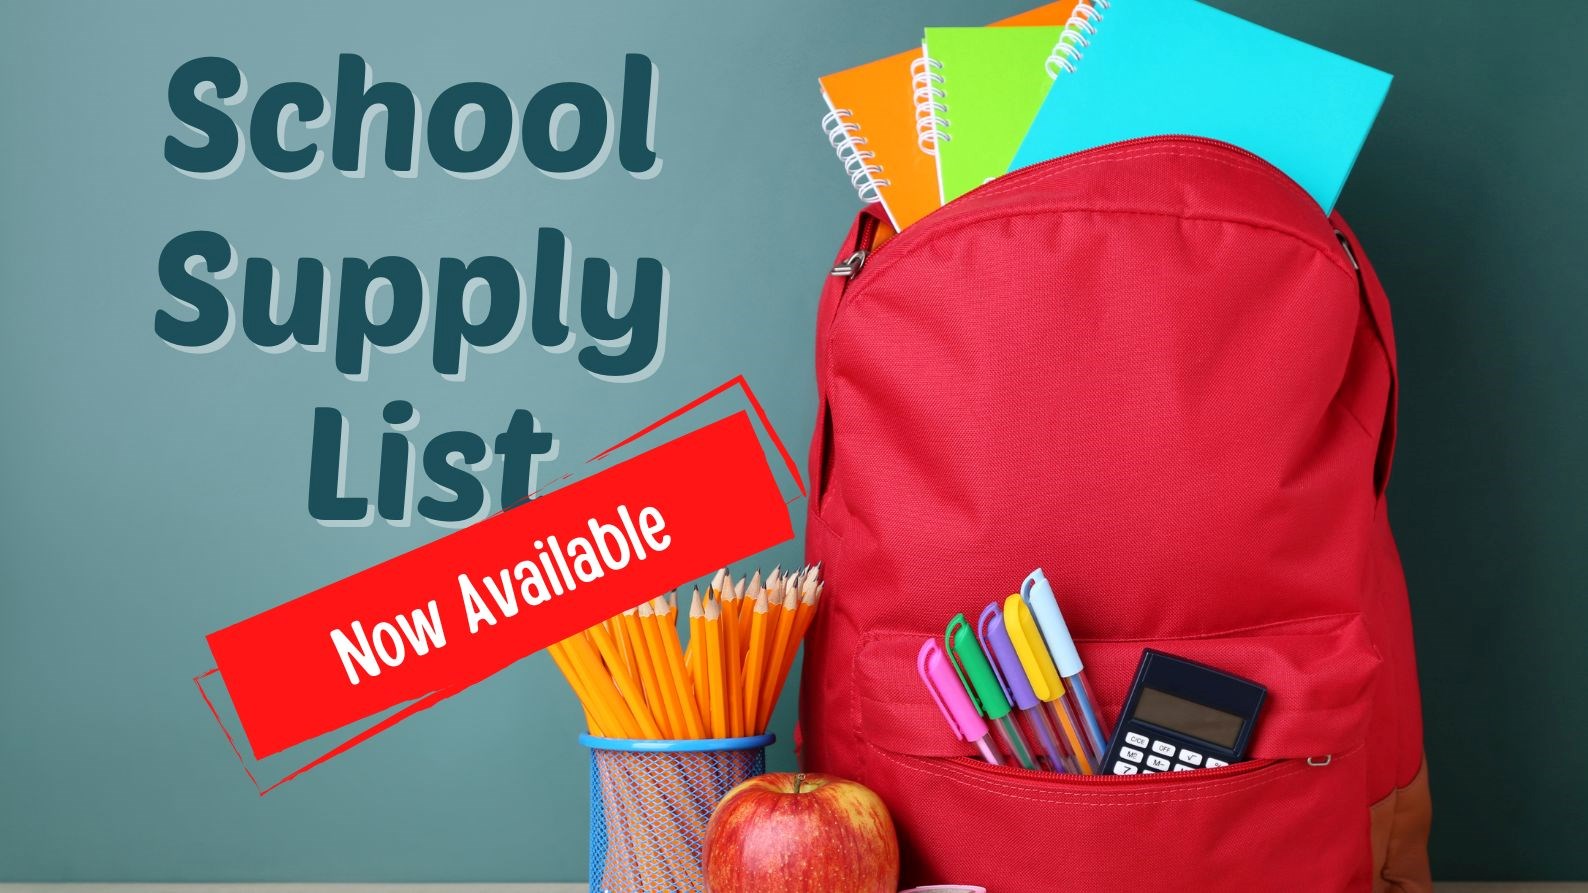 Image: red backpack with school supplies. Text: School Supply List Now Available